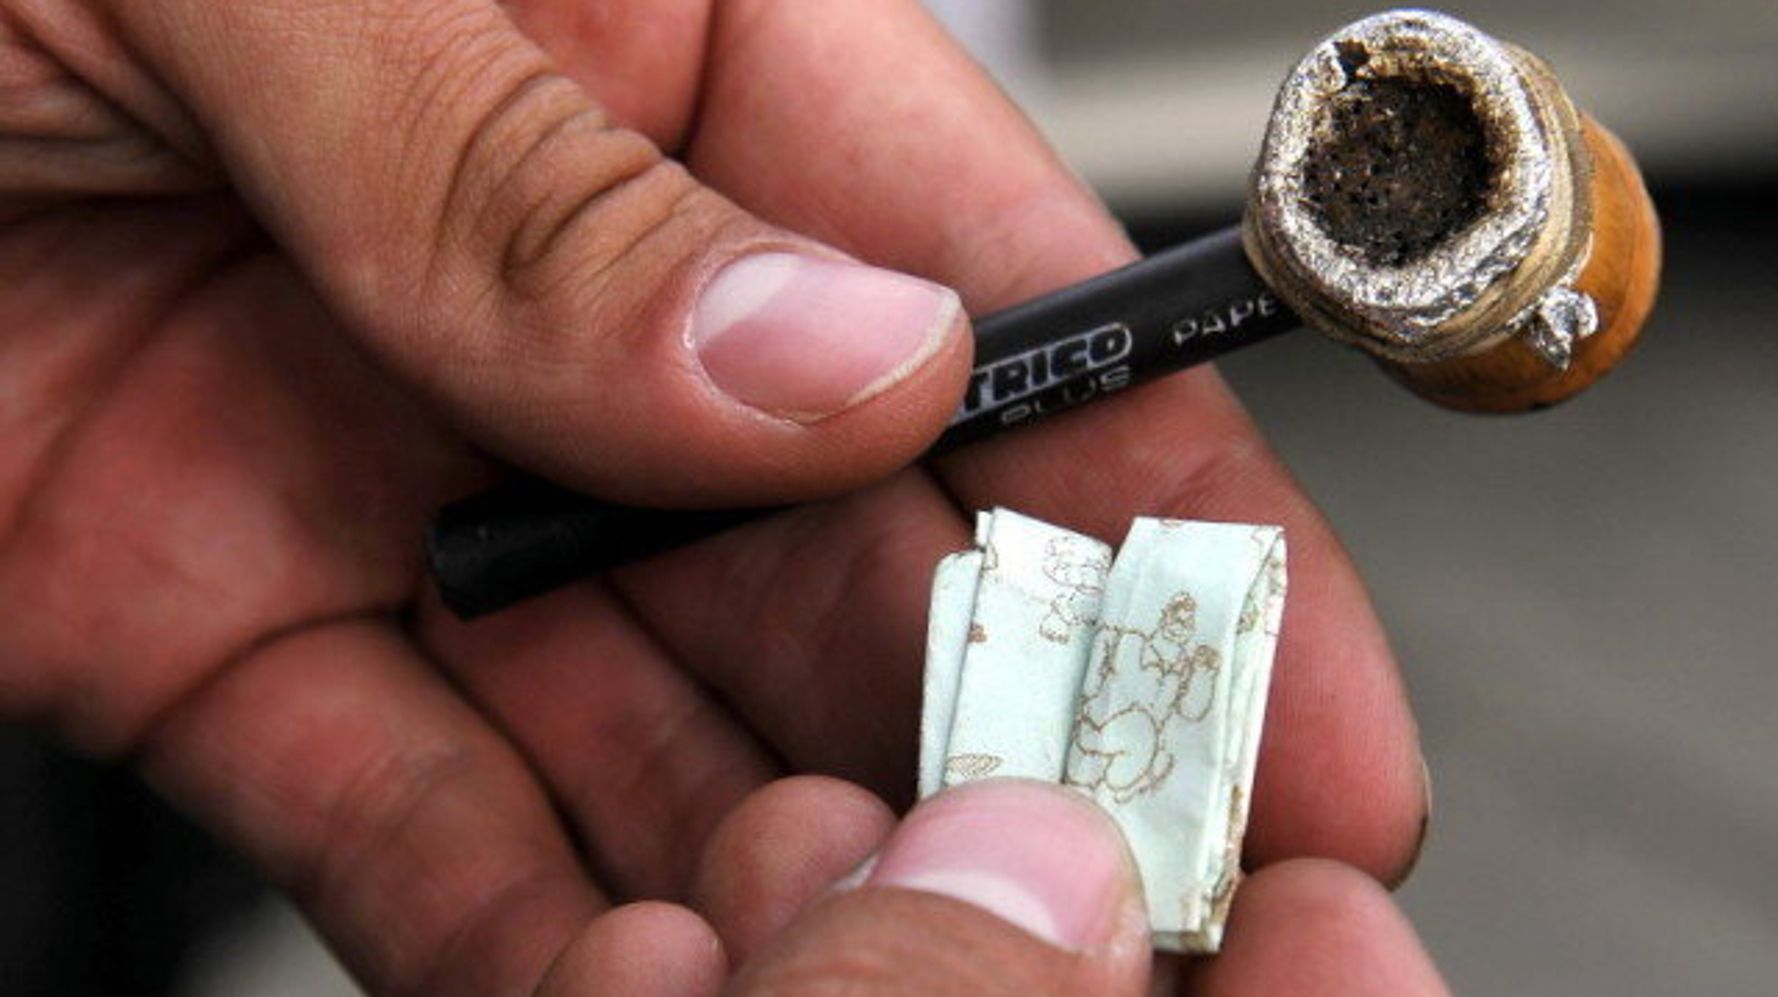 Why Taxpayers Should Subsidize Crack Pipes